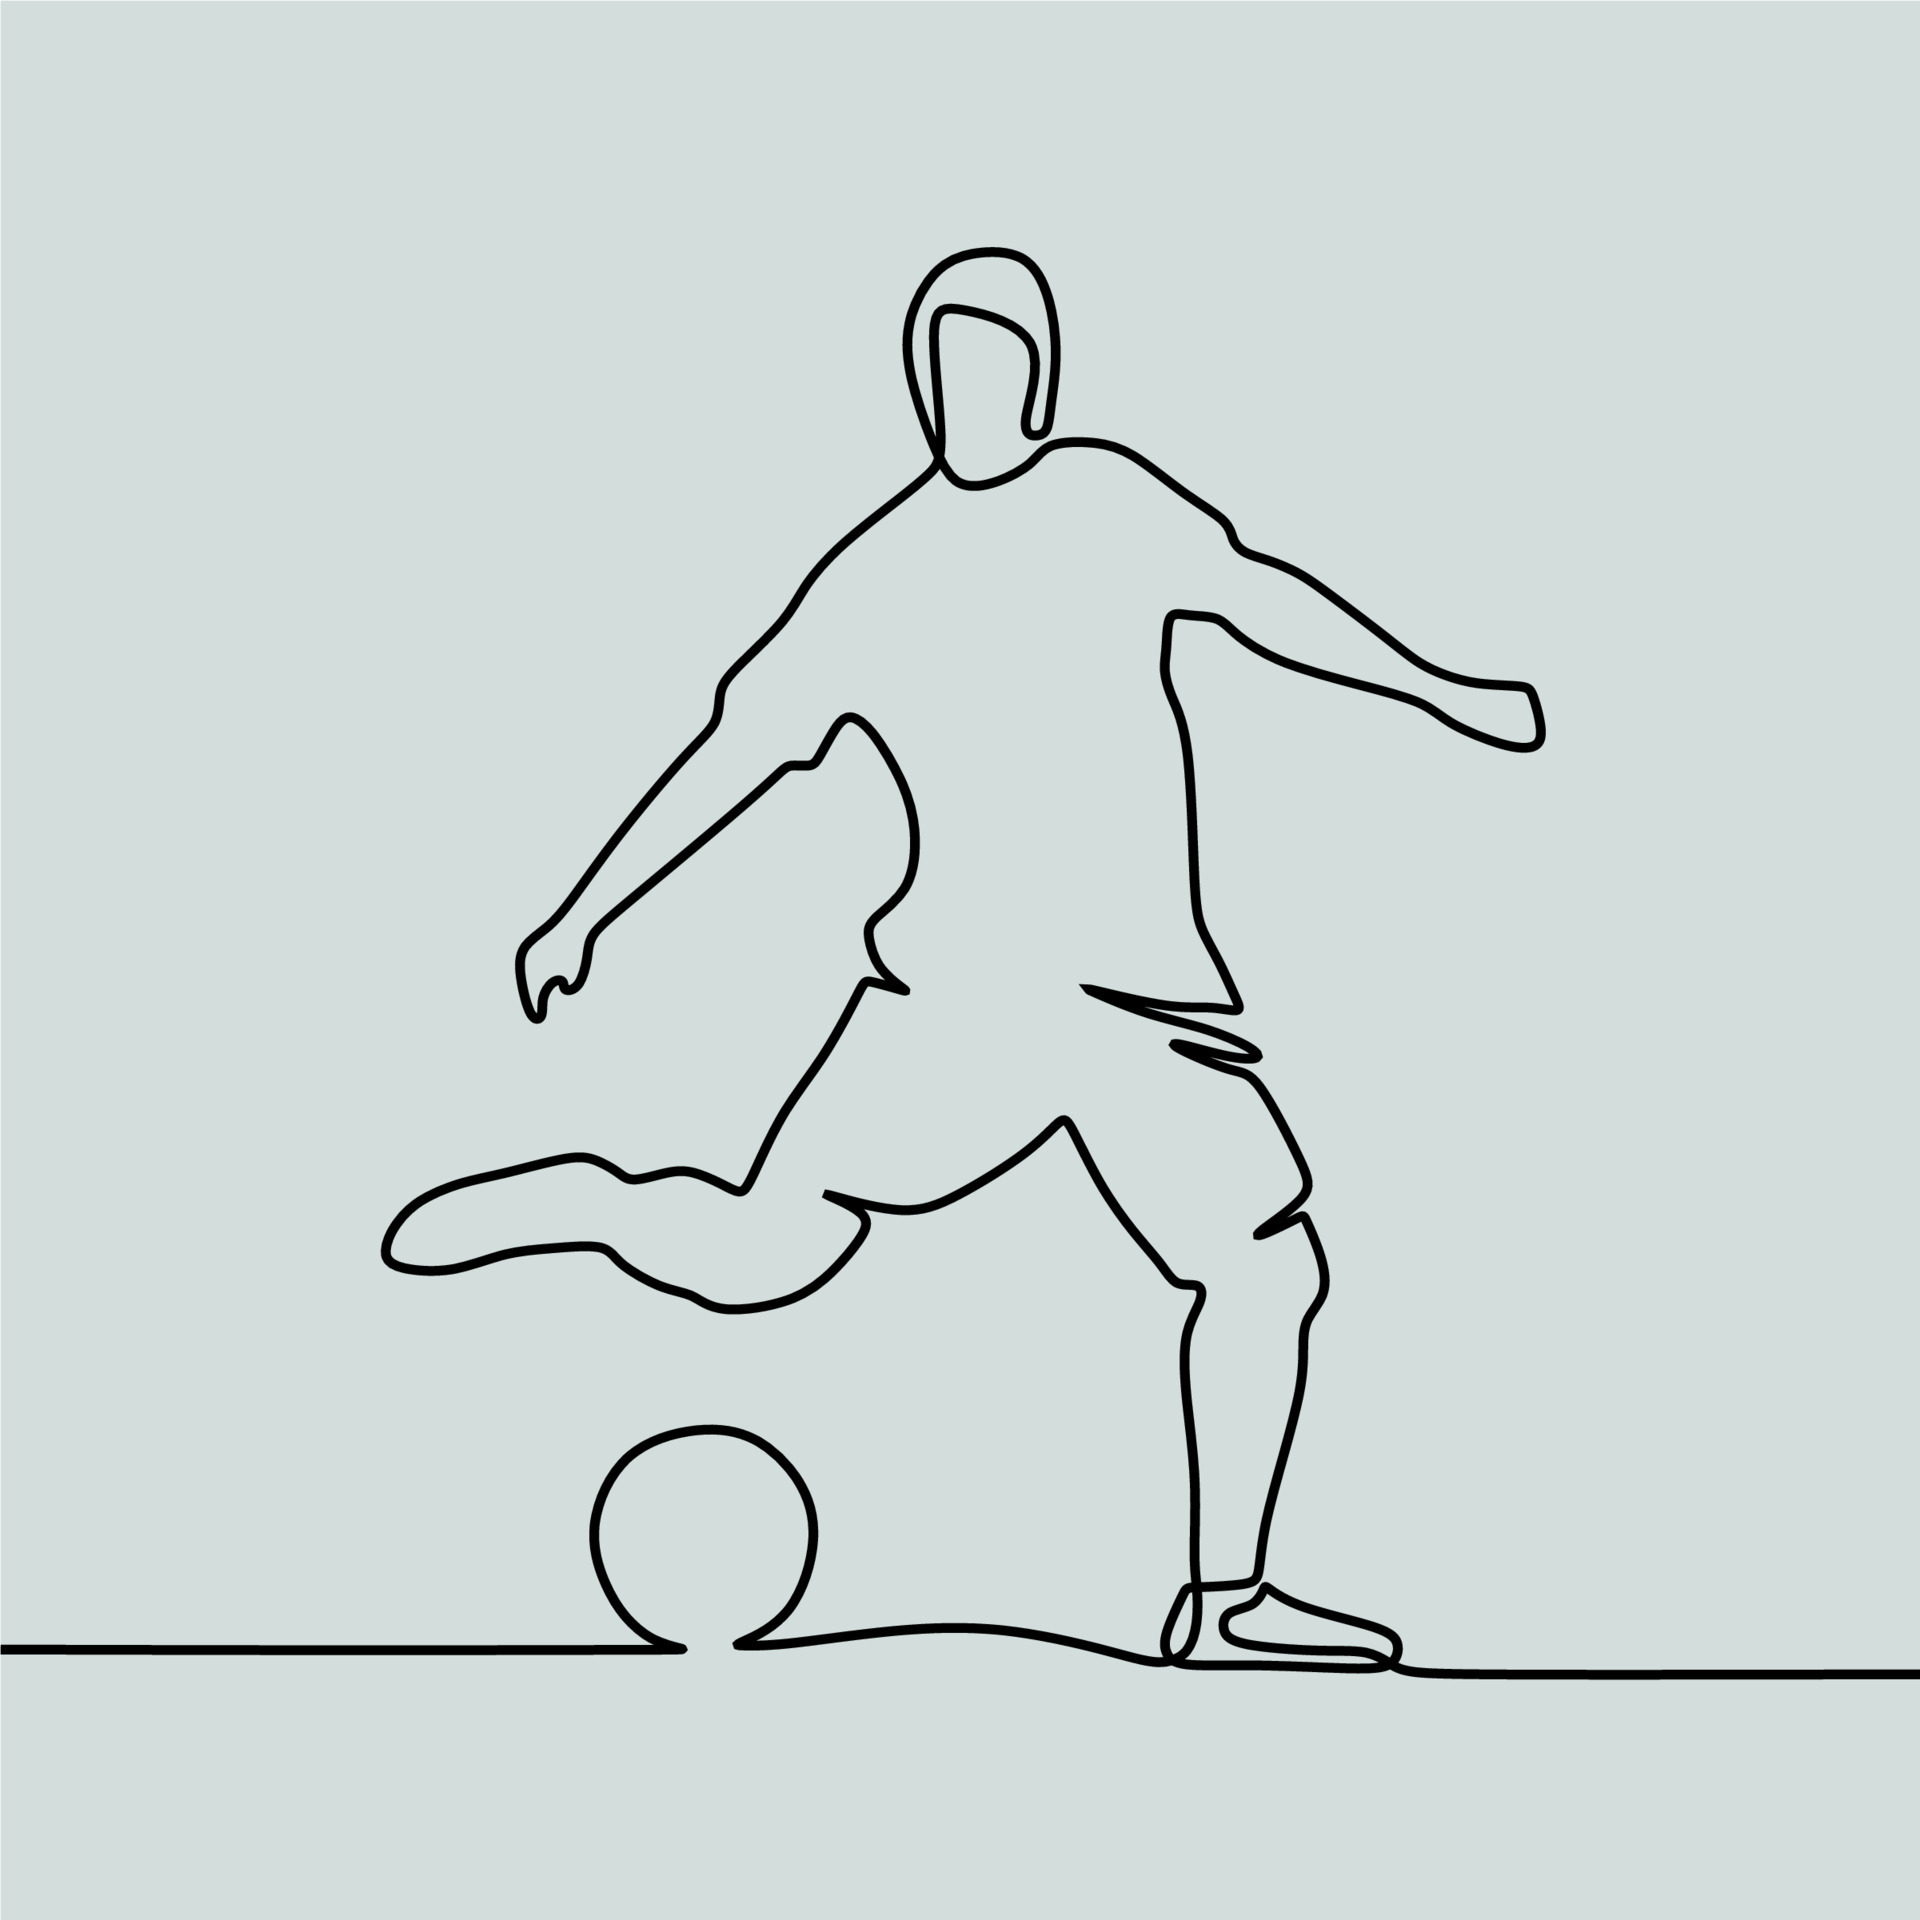 How to Draw a Football Player - Easy Drawing Art